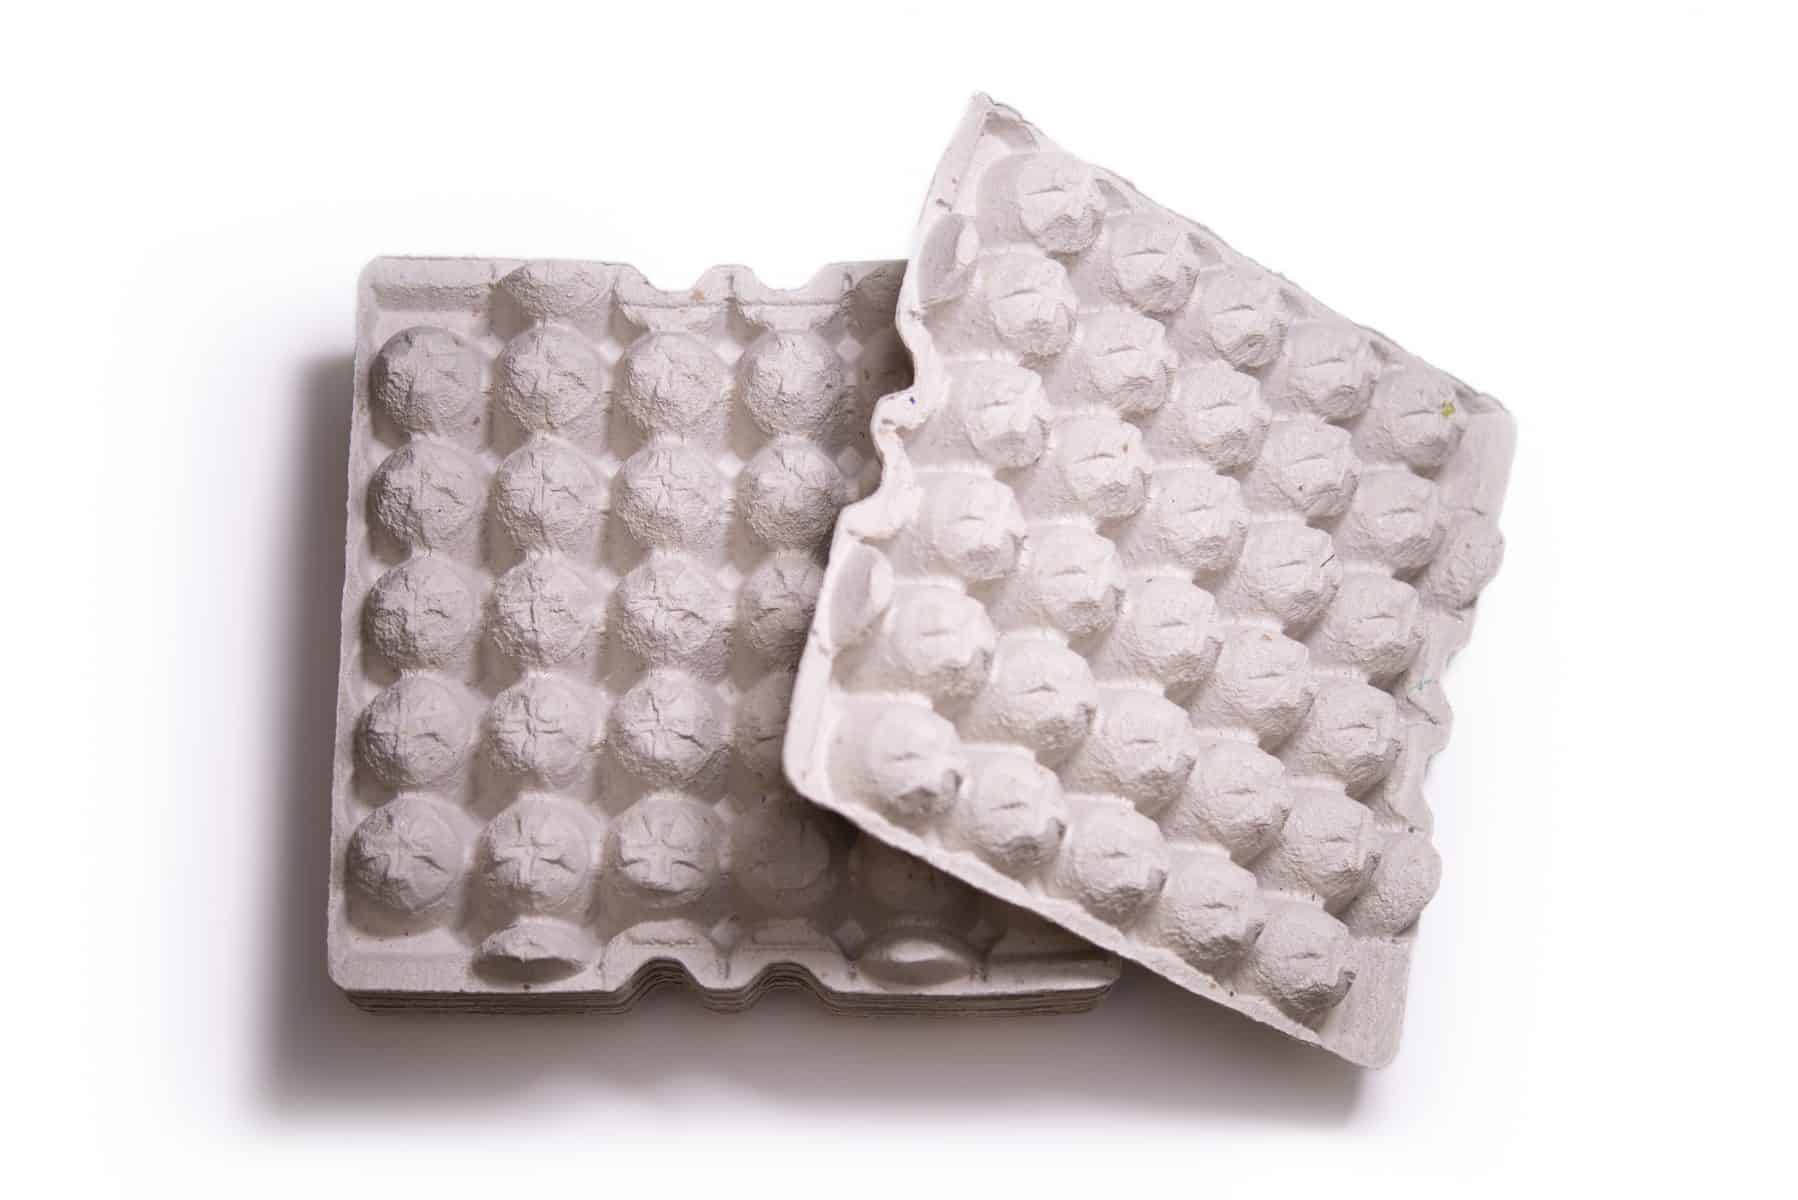 egg crate mattress for sale in the philippines